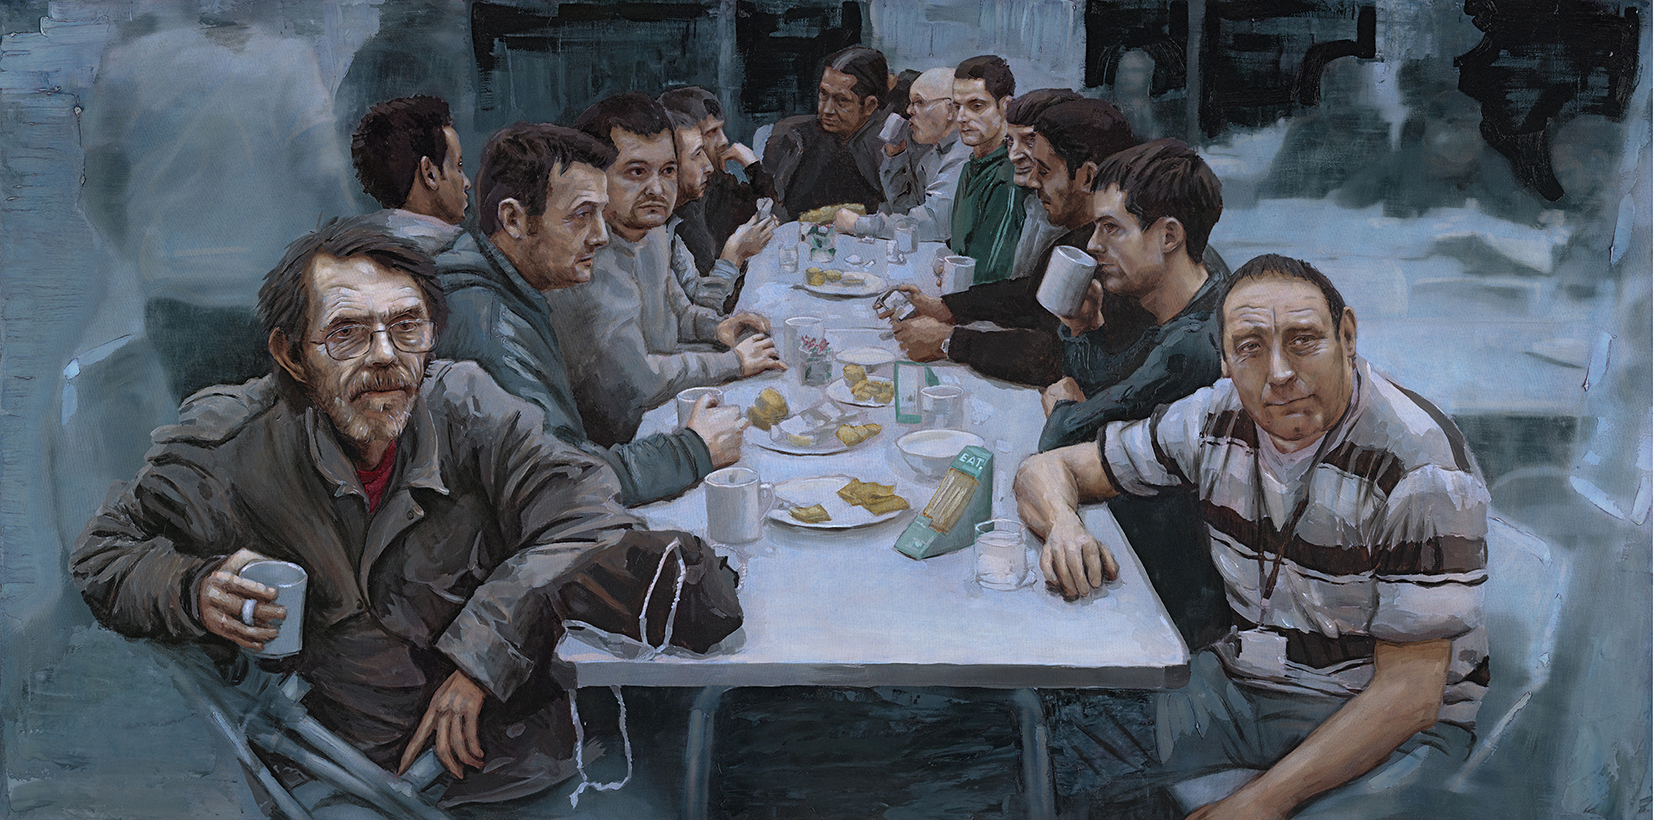 I.D Campbell’s Our Last Supper, featuring guests of Glasgow City Mission, was painted in 2015